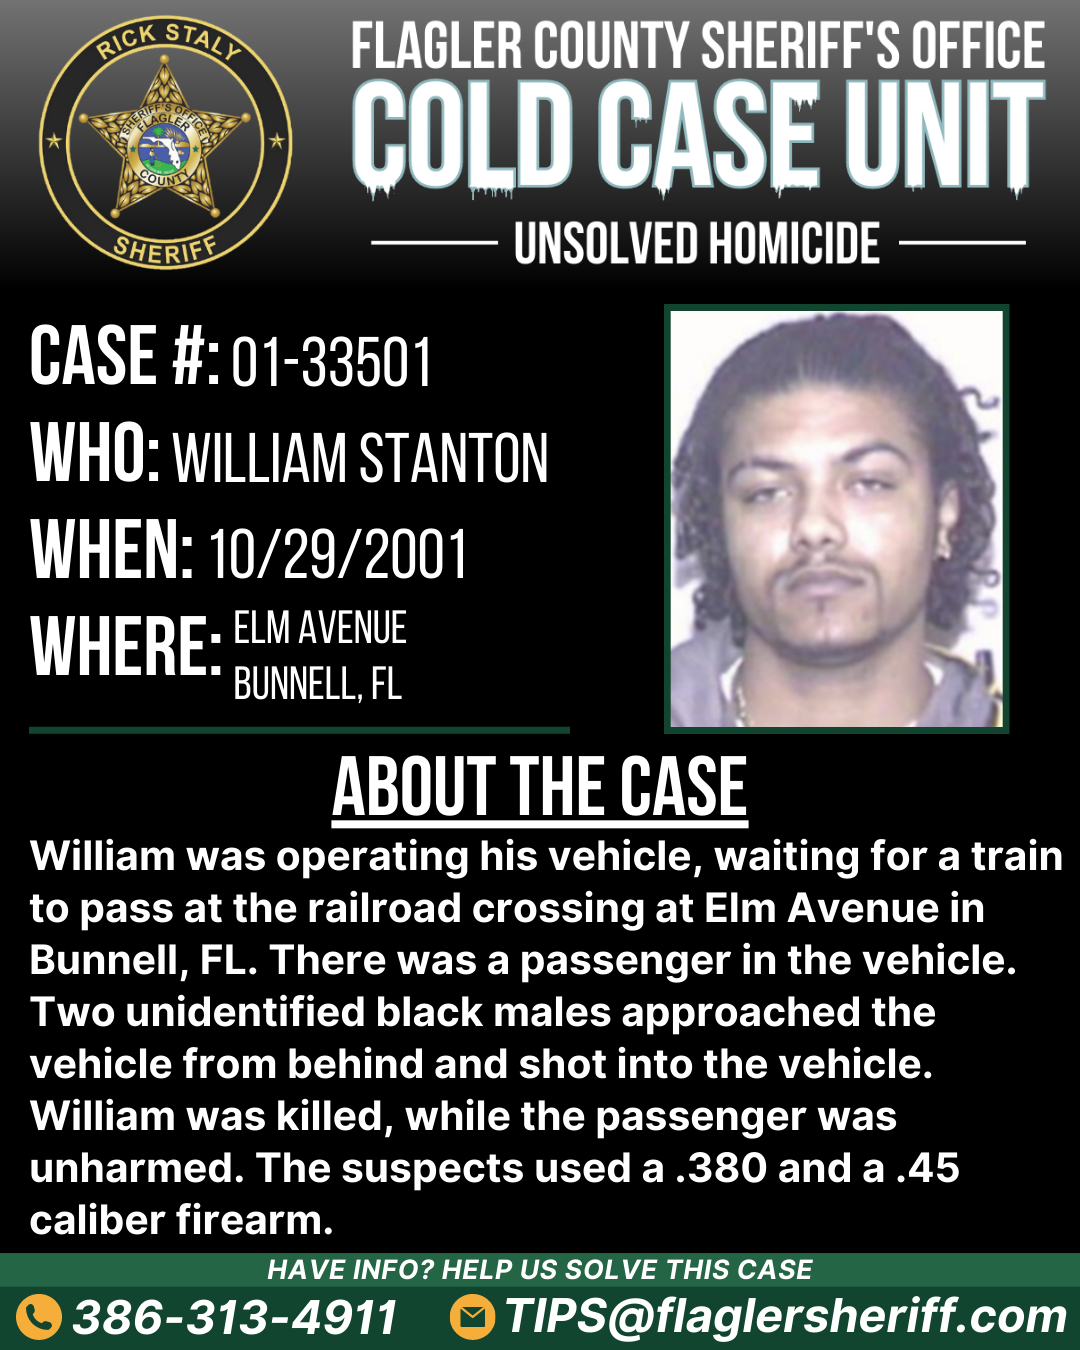 Unsolved homicide. Case #01-33501. Who: William Stanton. When: 10/29/2001. Where: Elm Avenue (Bunnell, FL). About the case: William was operating his vehicle, waiting for a train to pass at the railroad crossing at Elm Avenue in Bunnell, FL. There was a passenger in the vehicle. Two unidentified black males approached the vehicle from behind and shot into the vehicle. William was killed, while the passenger was unharmed. The suspects used a .380 and a .45 caliber firearm.